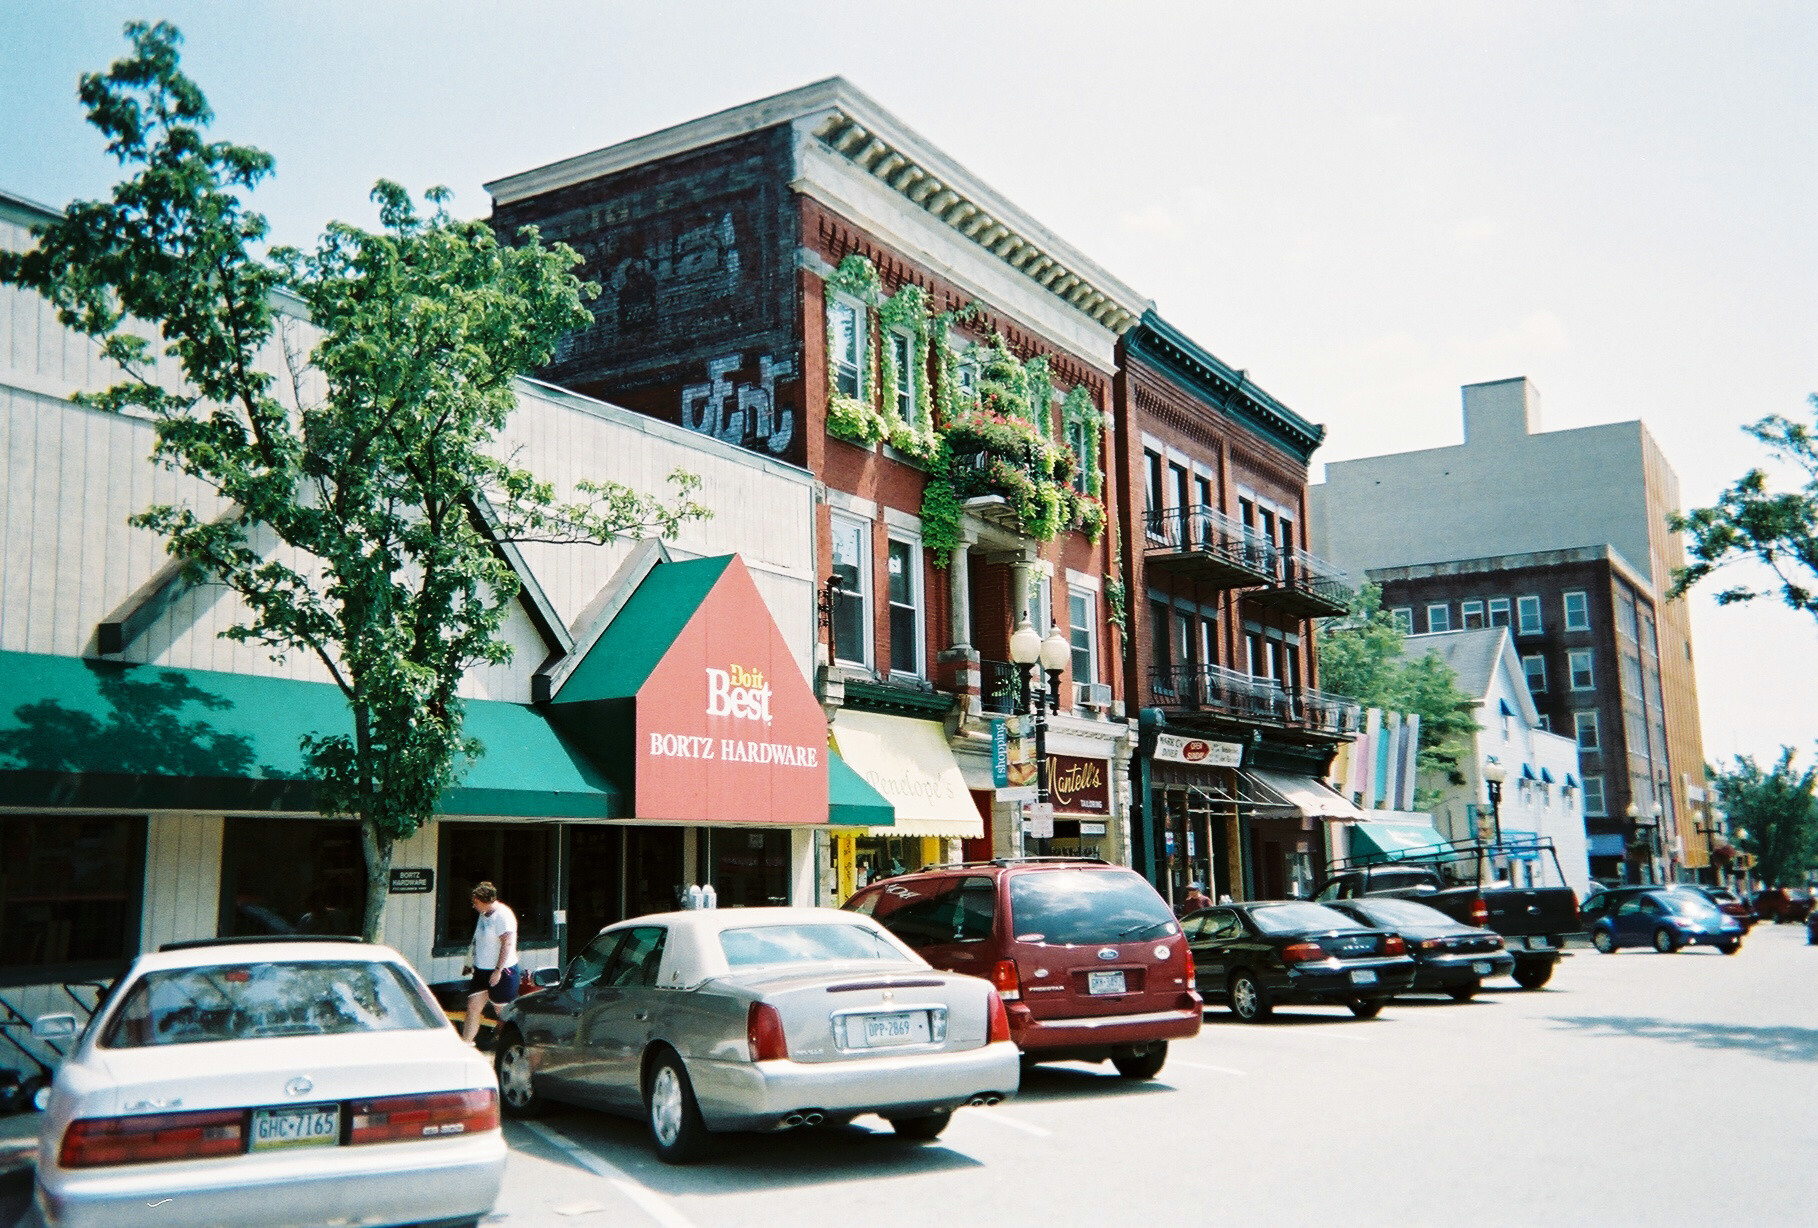 Greensburg Downtown Historic District